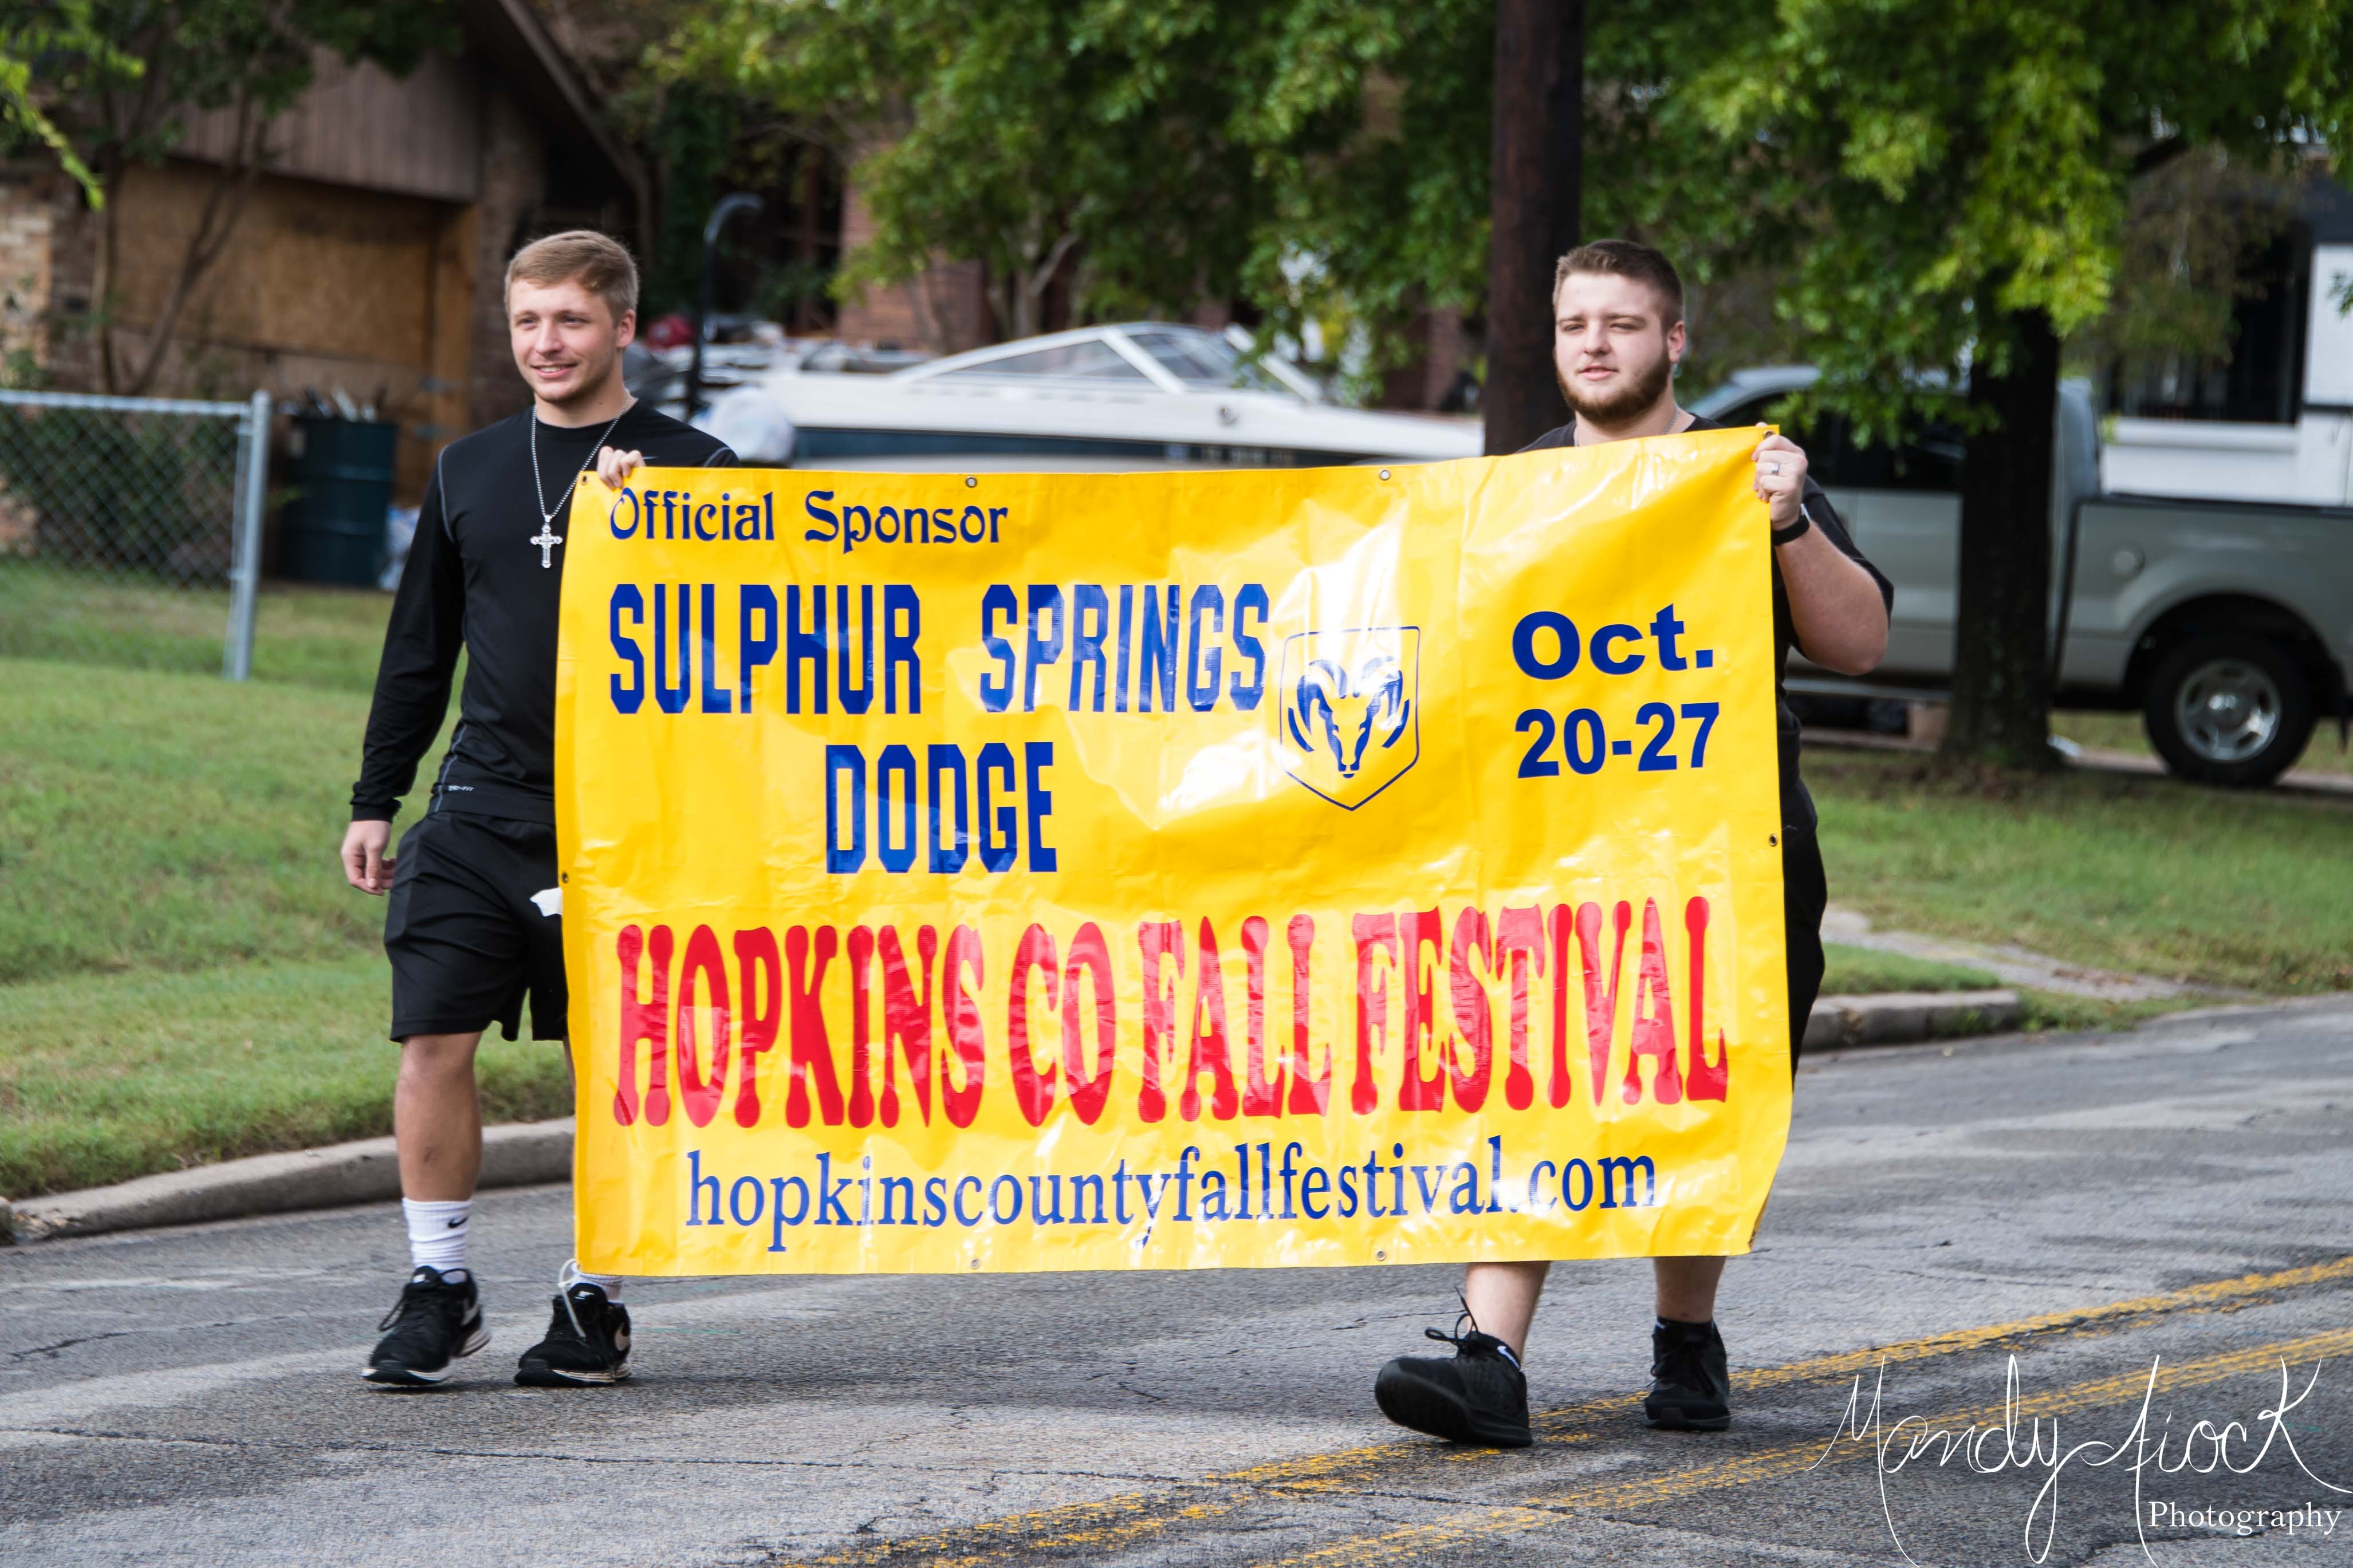 Photos from Saturday’s Hopkins County Fall Festival Parade by Mandy Fiock Photography!